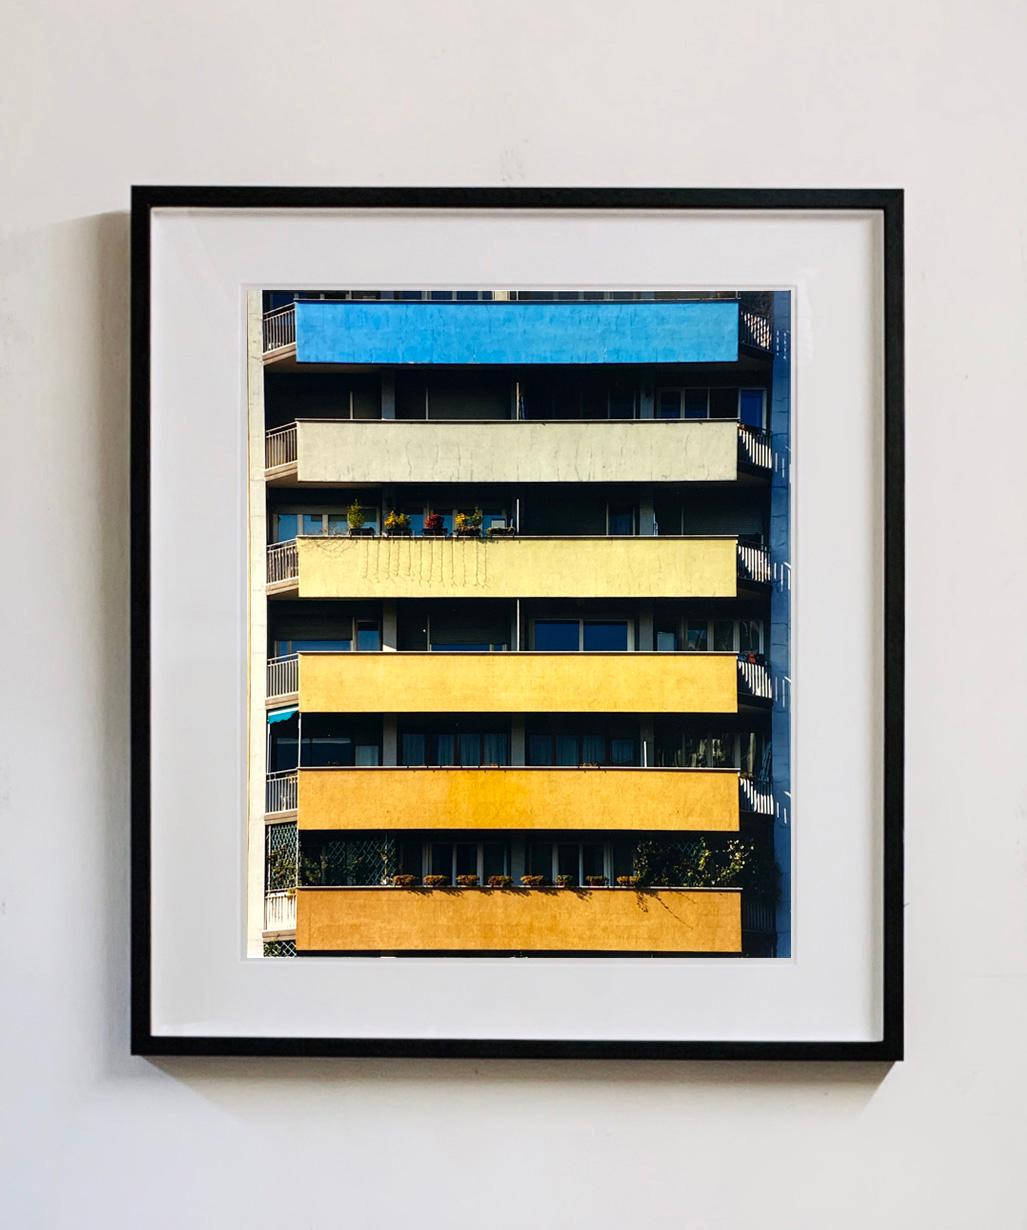 Rainbow Apartments, from Richard Heeps series A Short History of Milan began as a special project for the 2018 Affordable Art Fair Milan. It was well received and the artwork has become popular with art buyers around the world. Richard continues to